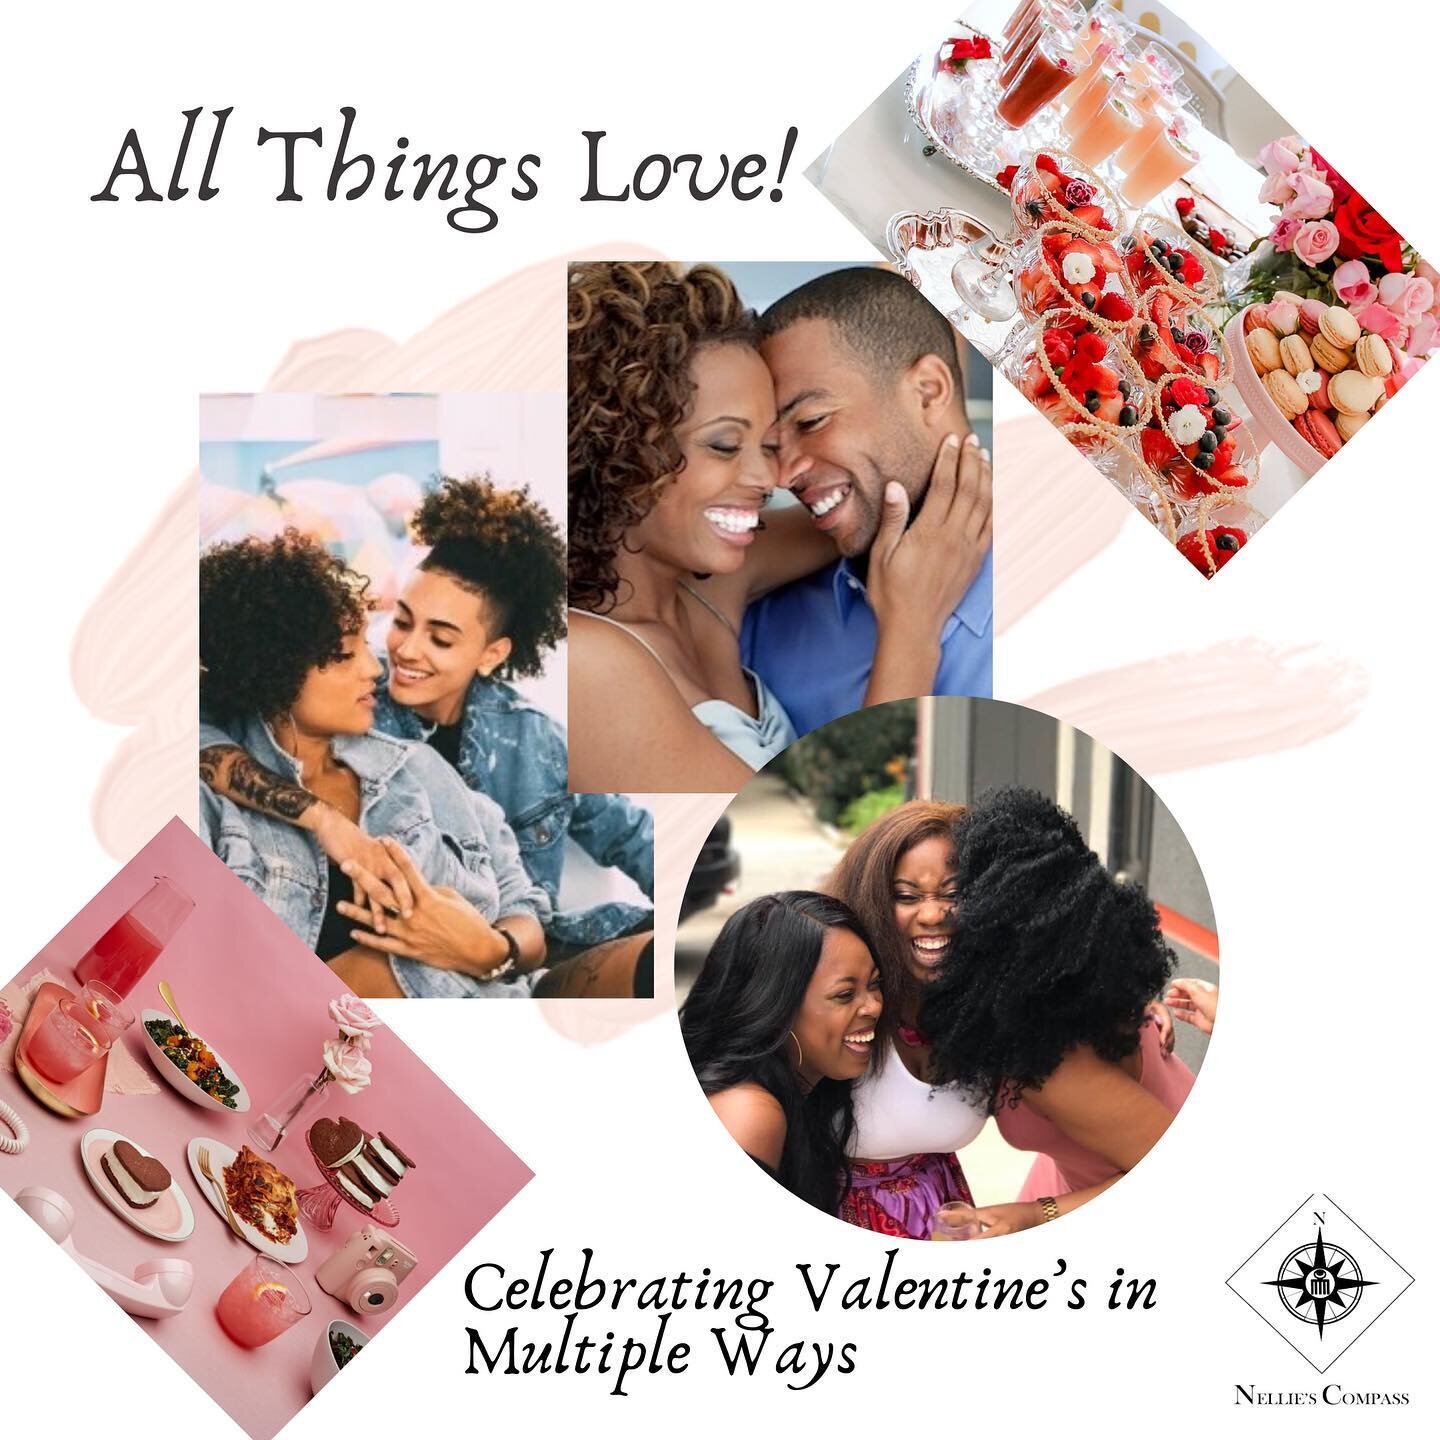 It&rsquo;s LOVE WEEK! Or Love MONTH, however you want to look at it. Take a look at some of our favorite activities happening in New York 🖤❤️ .
Galentine&rsquo;s! 🍷🎵💃🏿
Head over to @happycorkbrooklyn for Ladie&rsquo;s Wine Tasting hosted by @lak